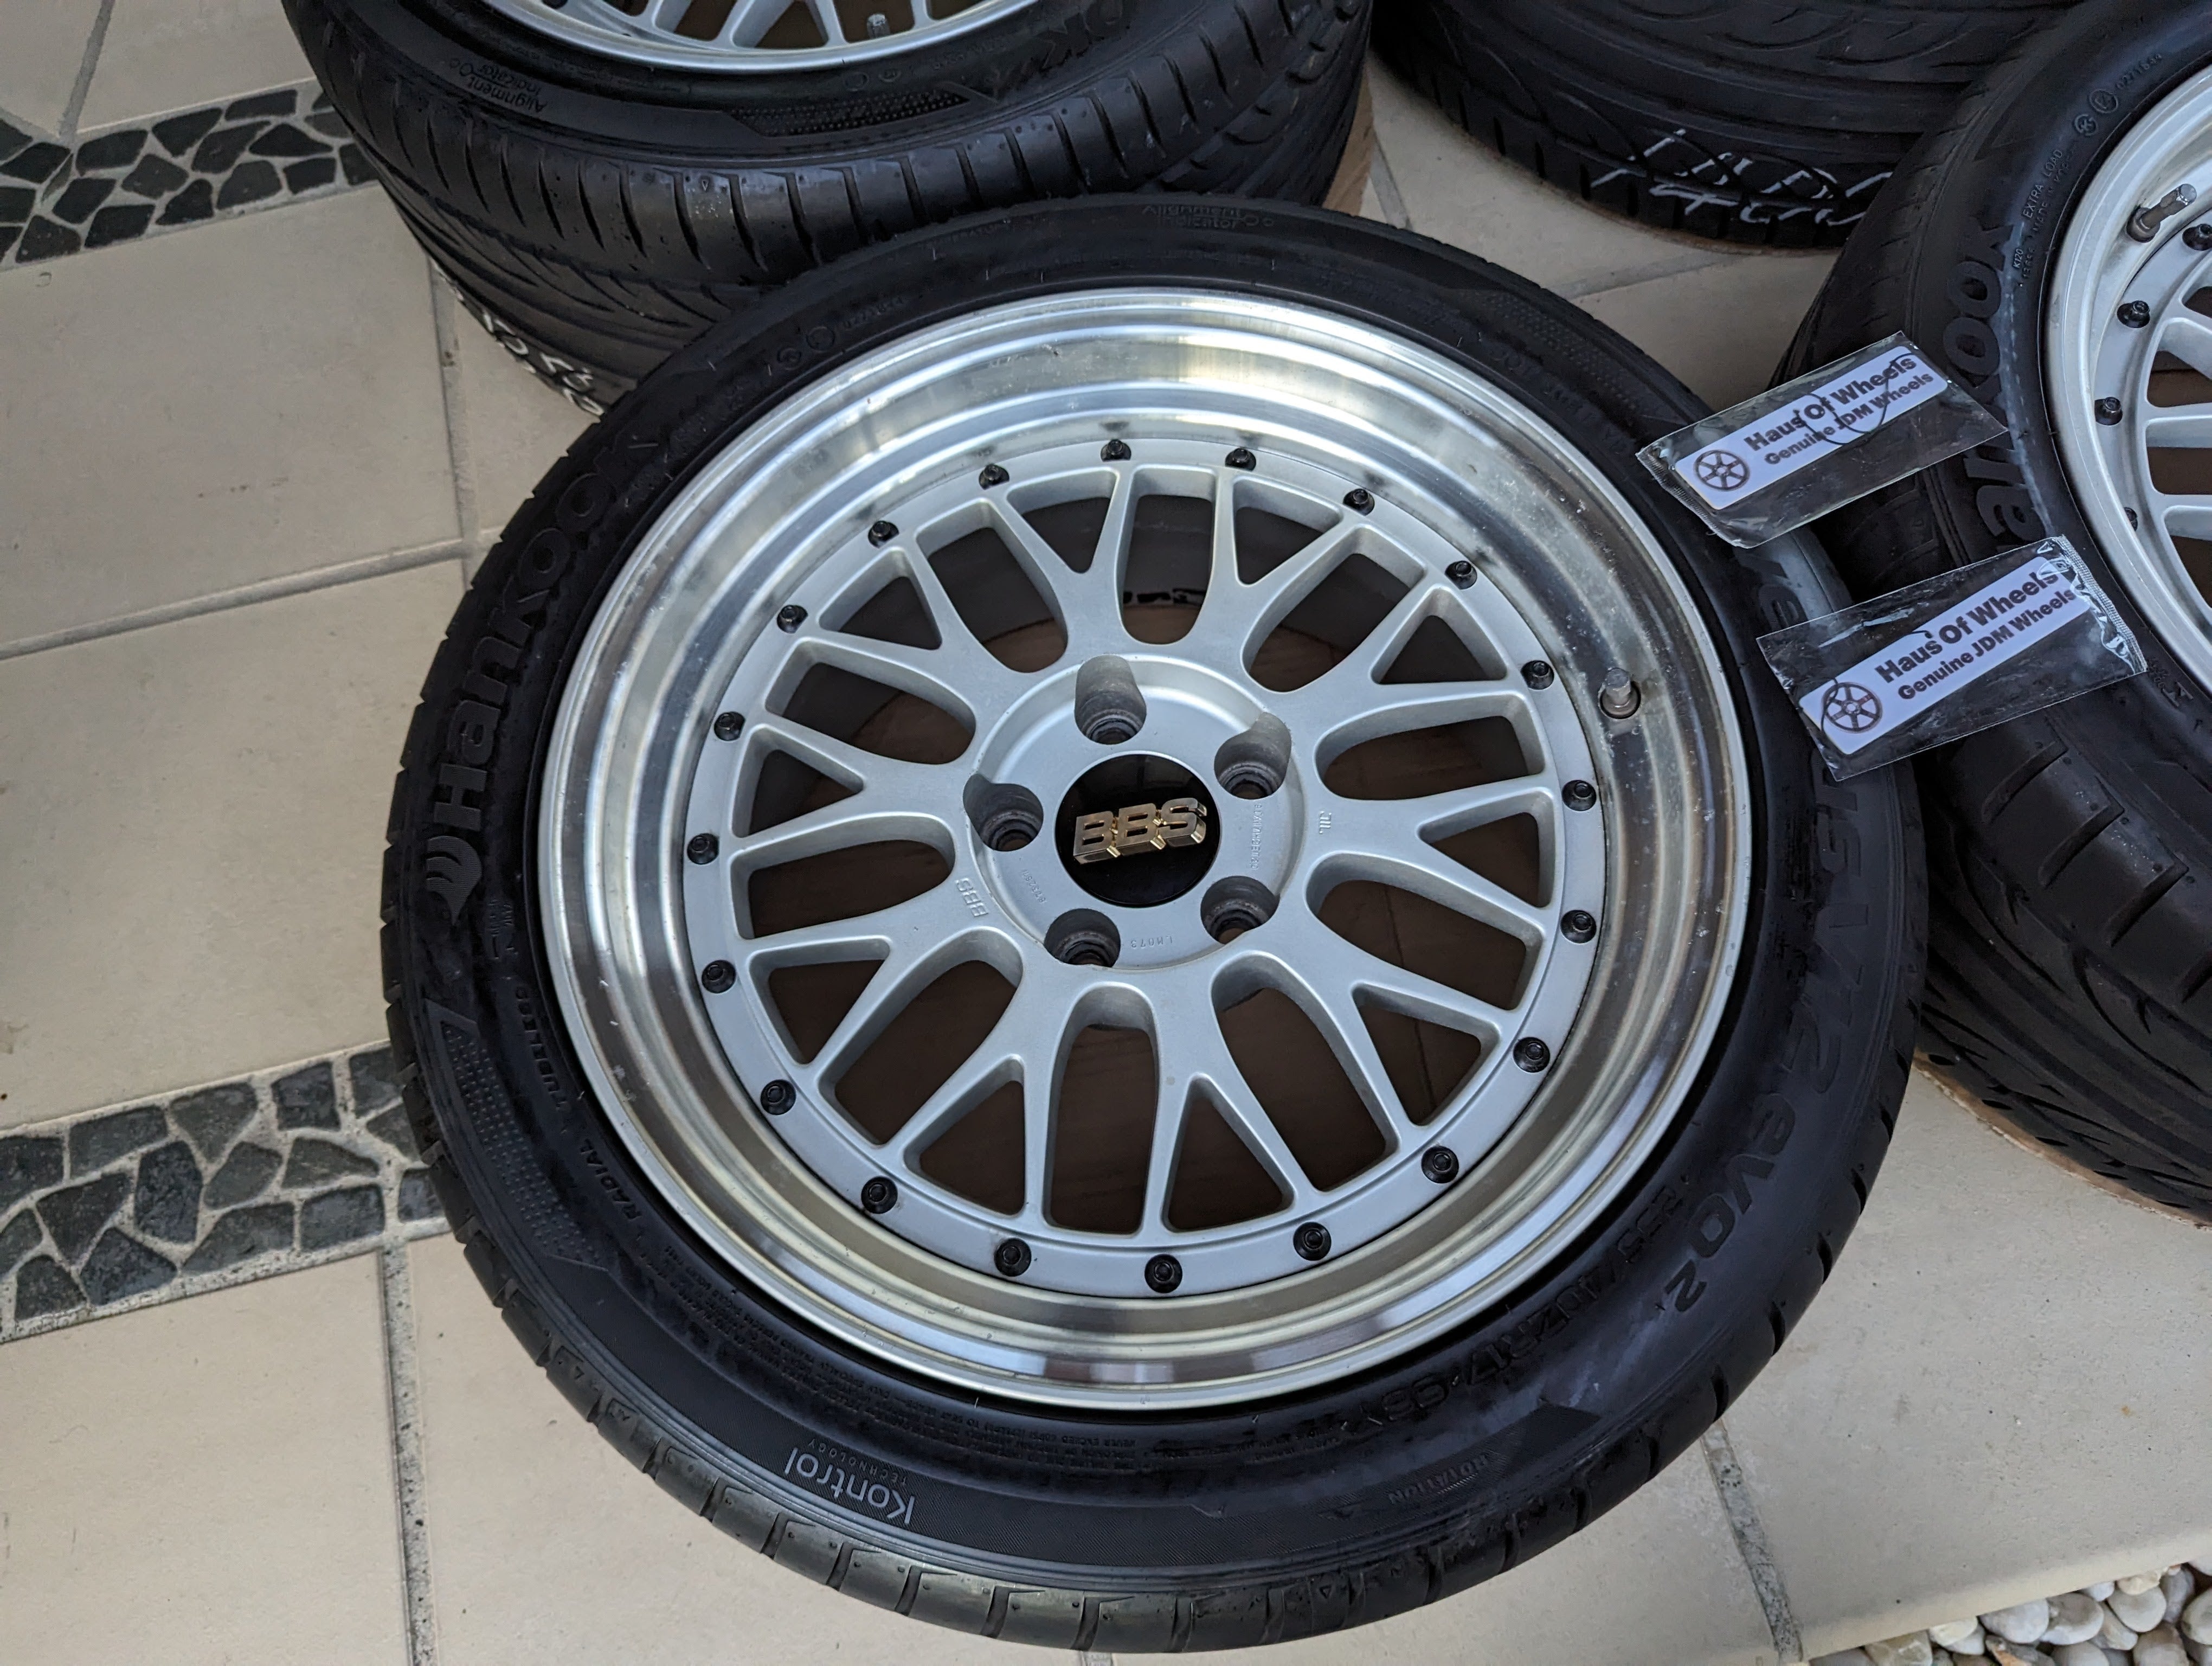 BBS LM (Silver) with Hankook Ventus Tyres and Genuine BBS Center Caps - 17x9 +20